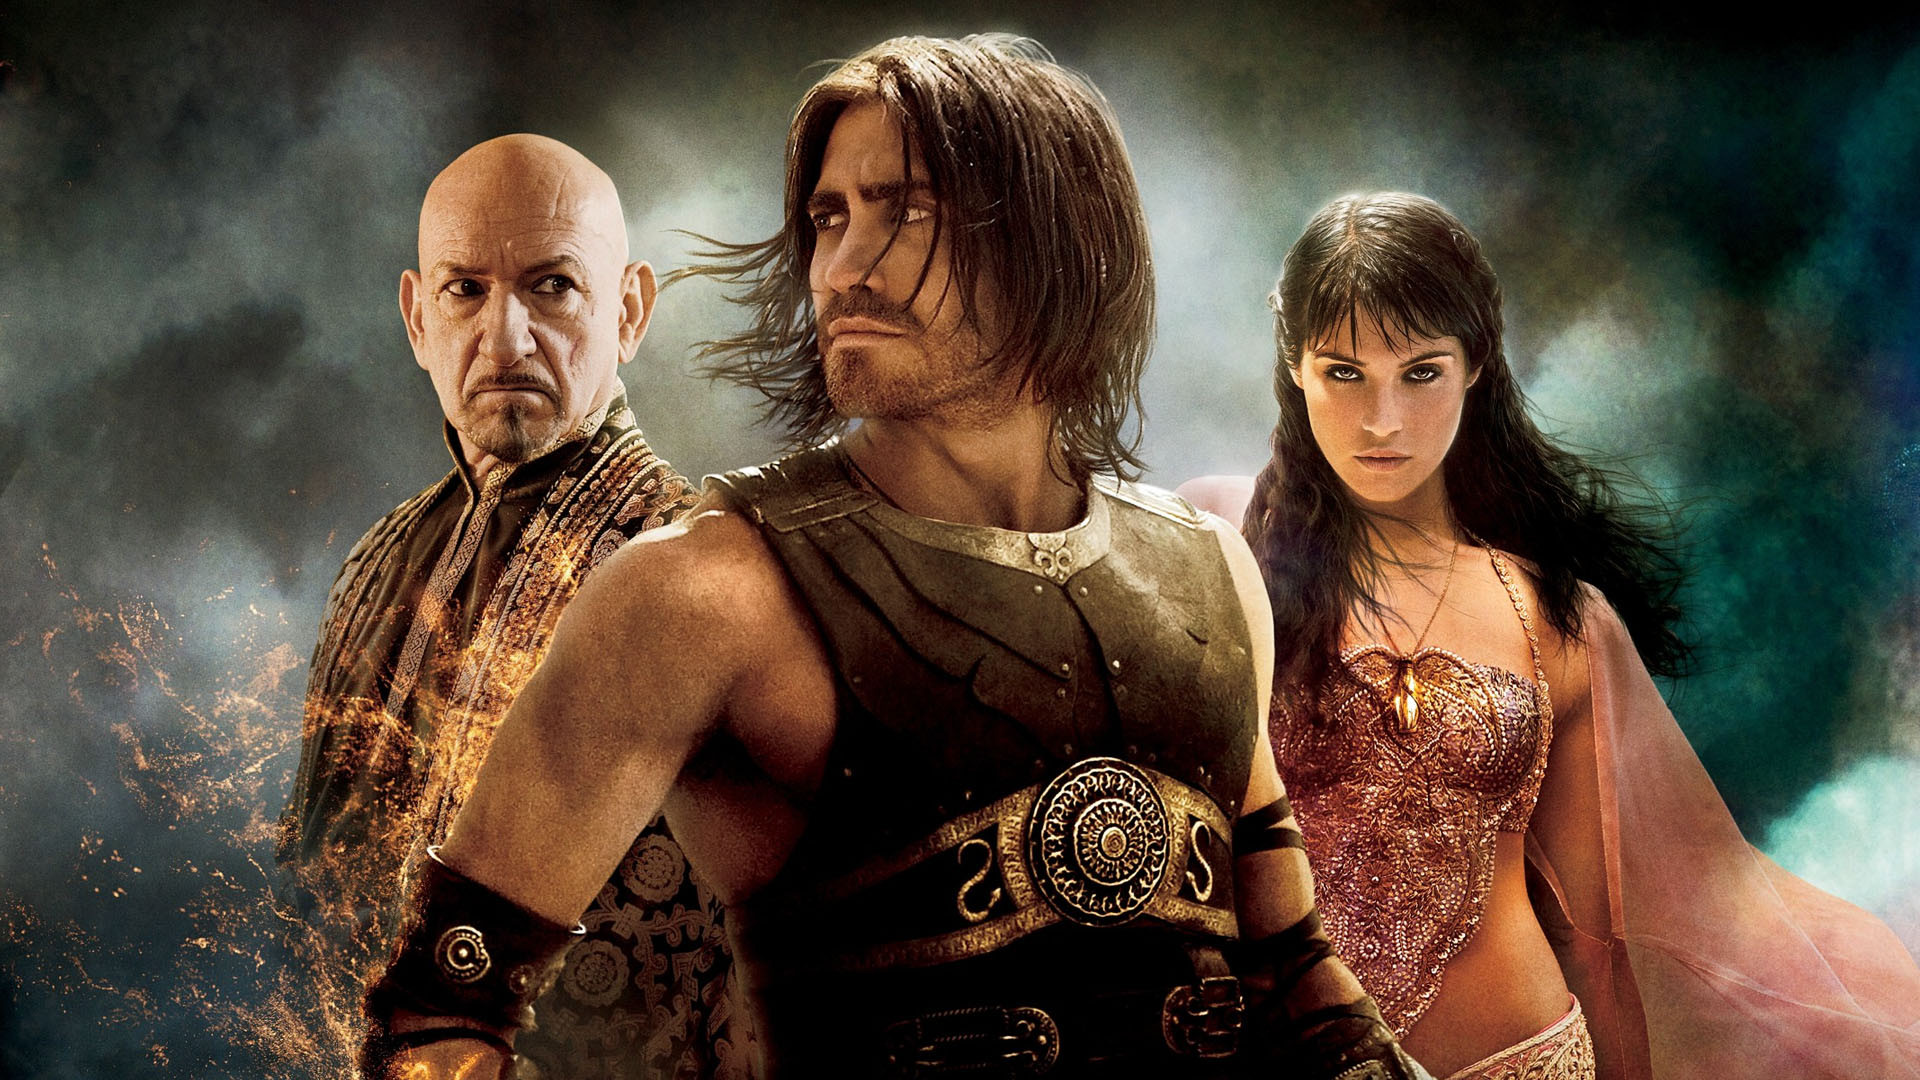 movie, prince of persia: the sands of time, gemma arterton, jake gyllenhaal, prince of persia